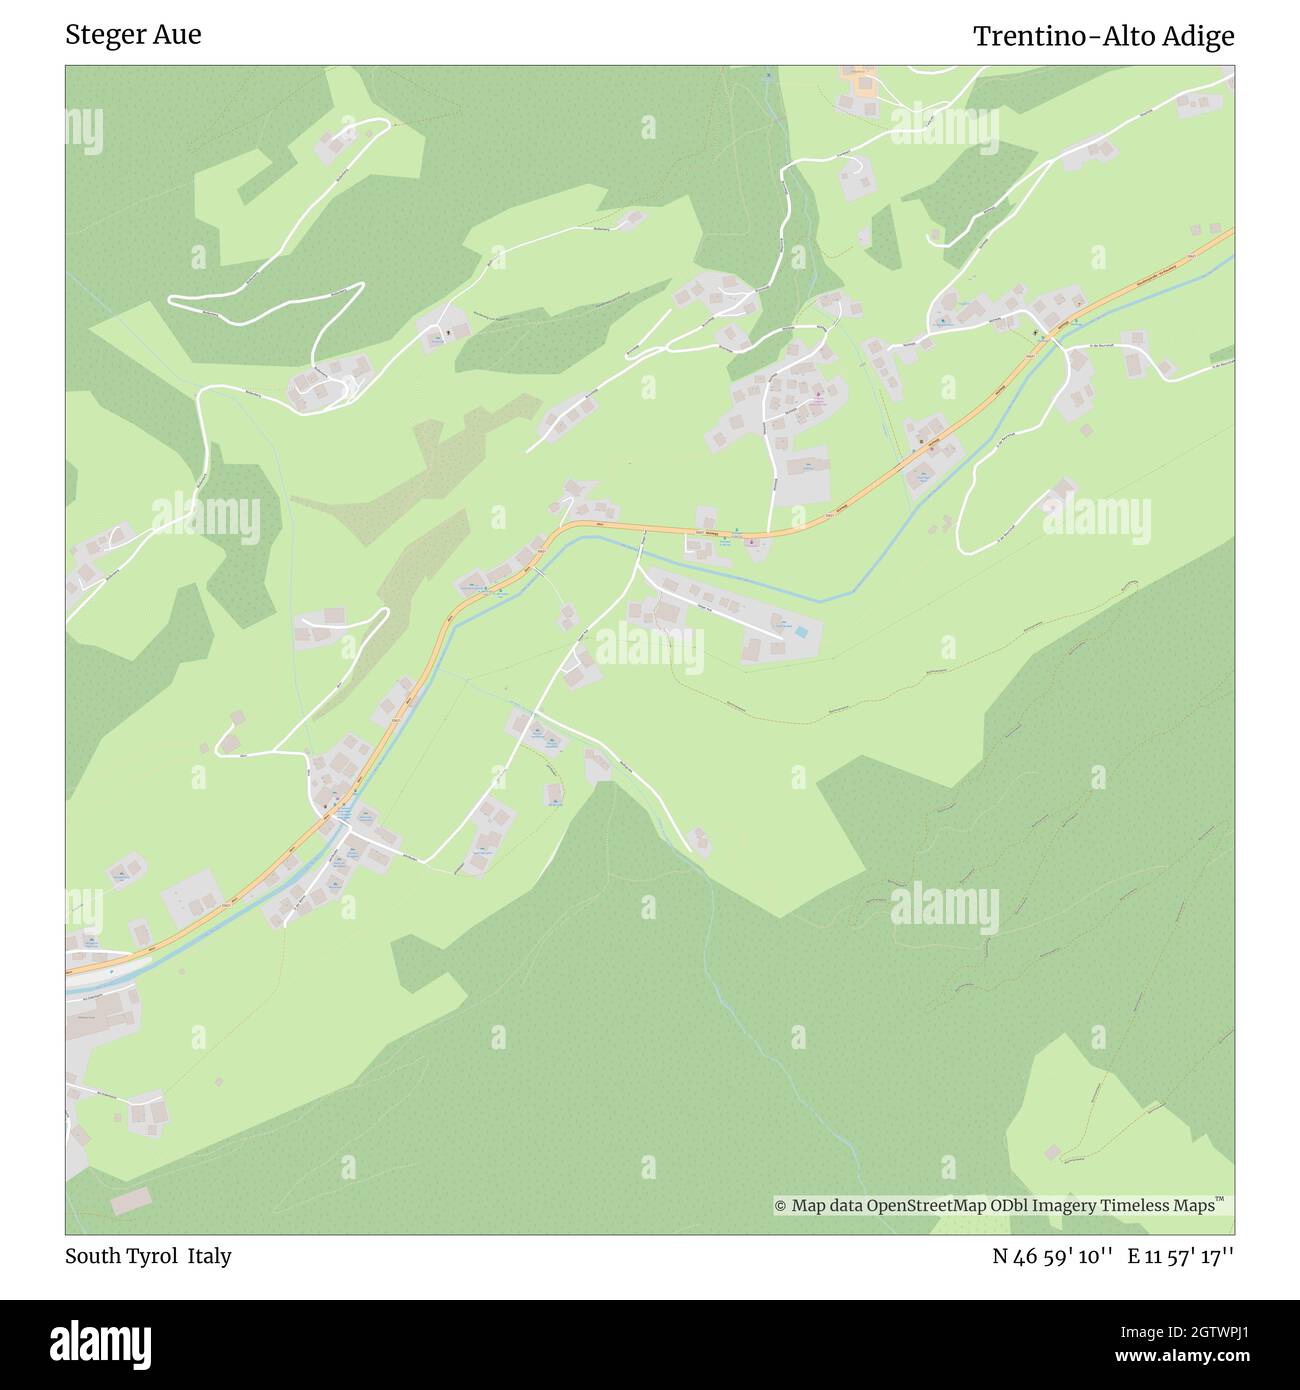 Steger Aue, South Tyrol, Italy, Trentino-Alto Adige, N 46 59' 10'', E 11 57' 17'', map, Timeless Map published in 2021. Travelers, explorers and adventurers like Florence Nightingale, David Livingstone, Ernest Shackleton, Lewis and Clark and Sherlock Holmes relied on maps to plan travels to the world's most remote corners, Timeless Maps is mapping most locations on the globe, showing the achievement of great dreams Stock Photo